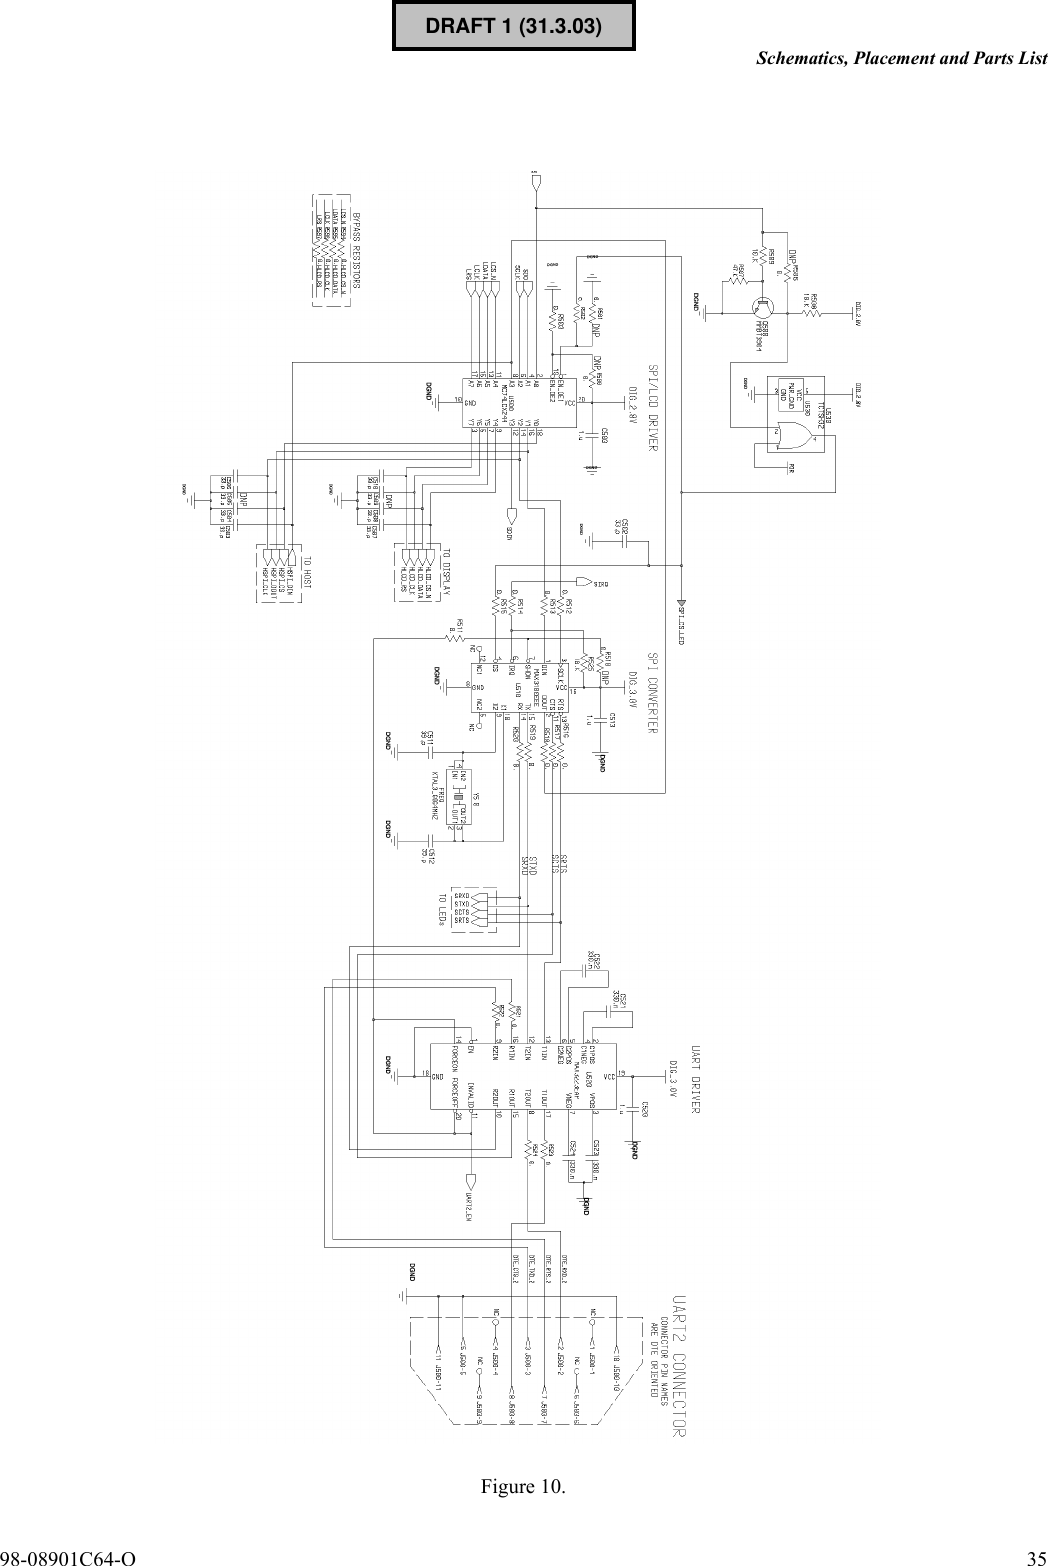 98-08901C64-O 35Schematics, Placement and Parts ListFigure 10.DRAFT 1 (31.3.03)